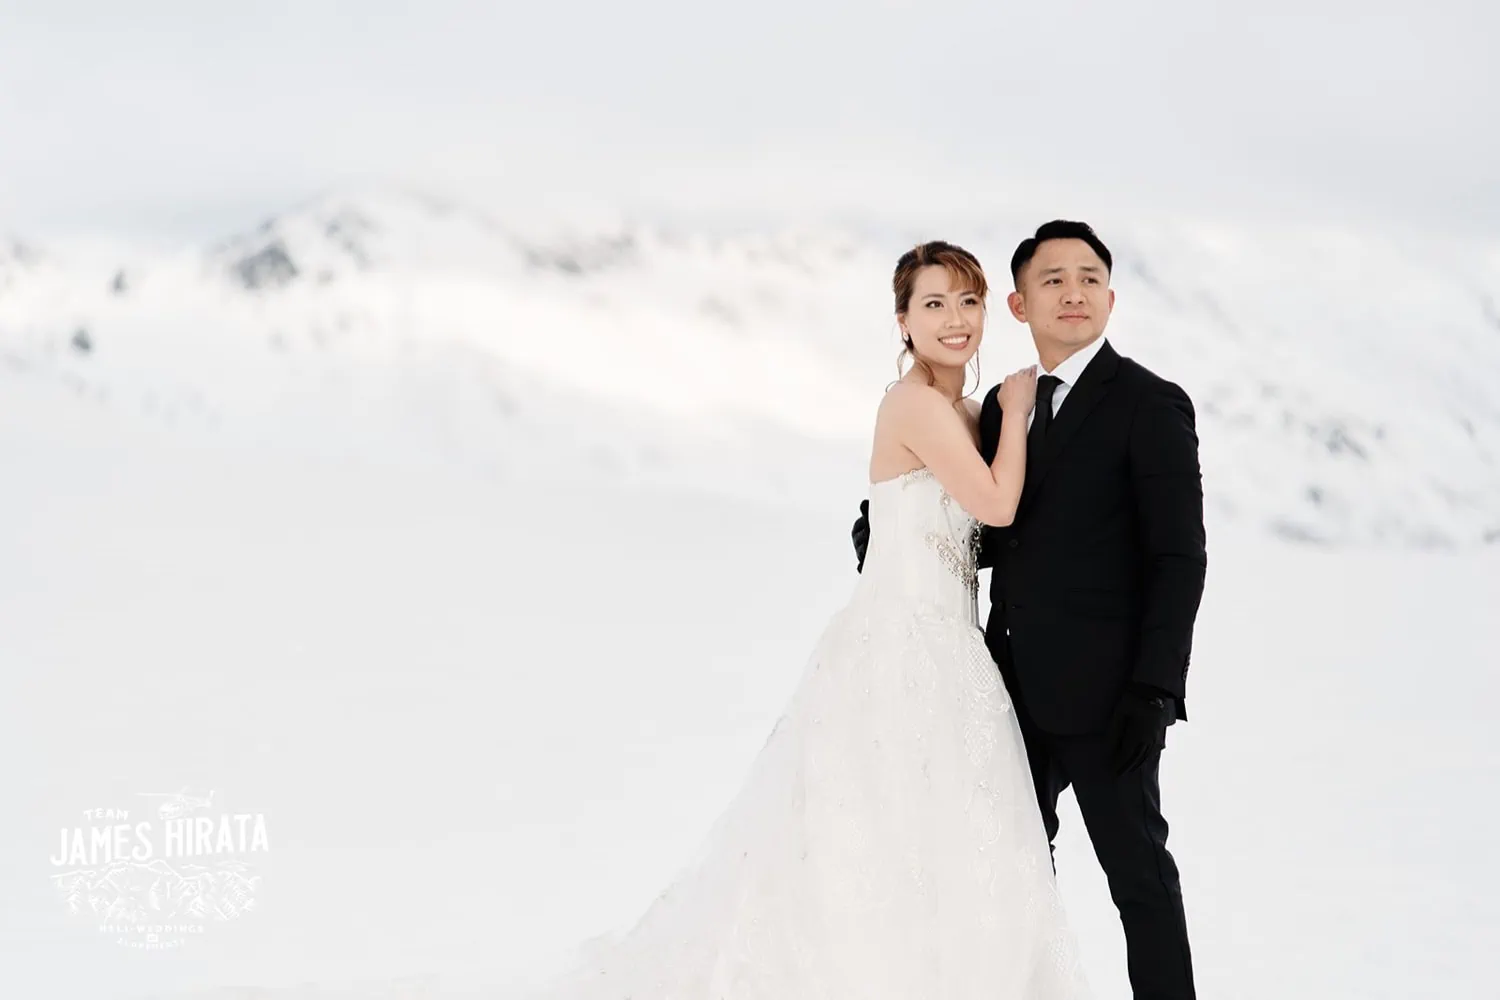 Joan and Brandon posing for a photo in the snow during their Queenstown Heli Pre Wedding Shoot.